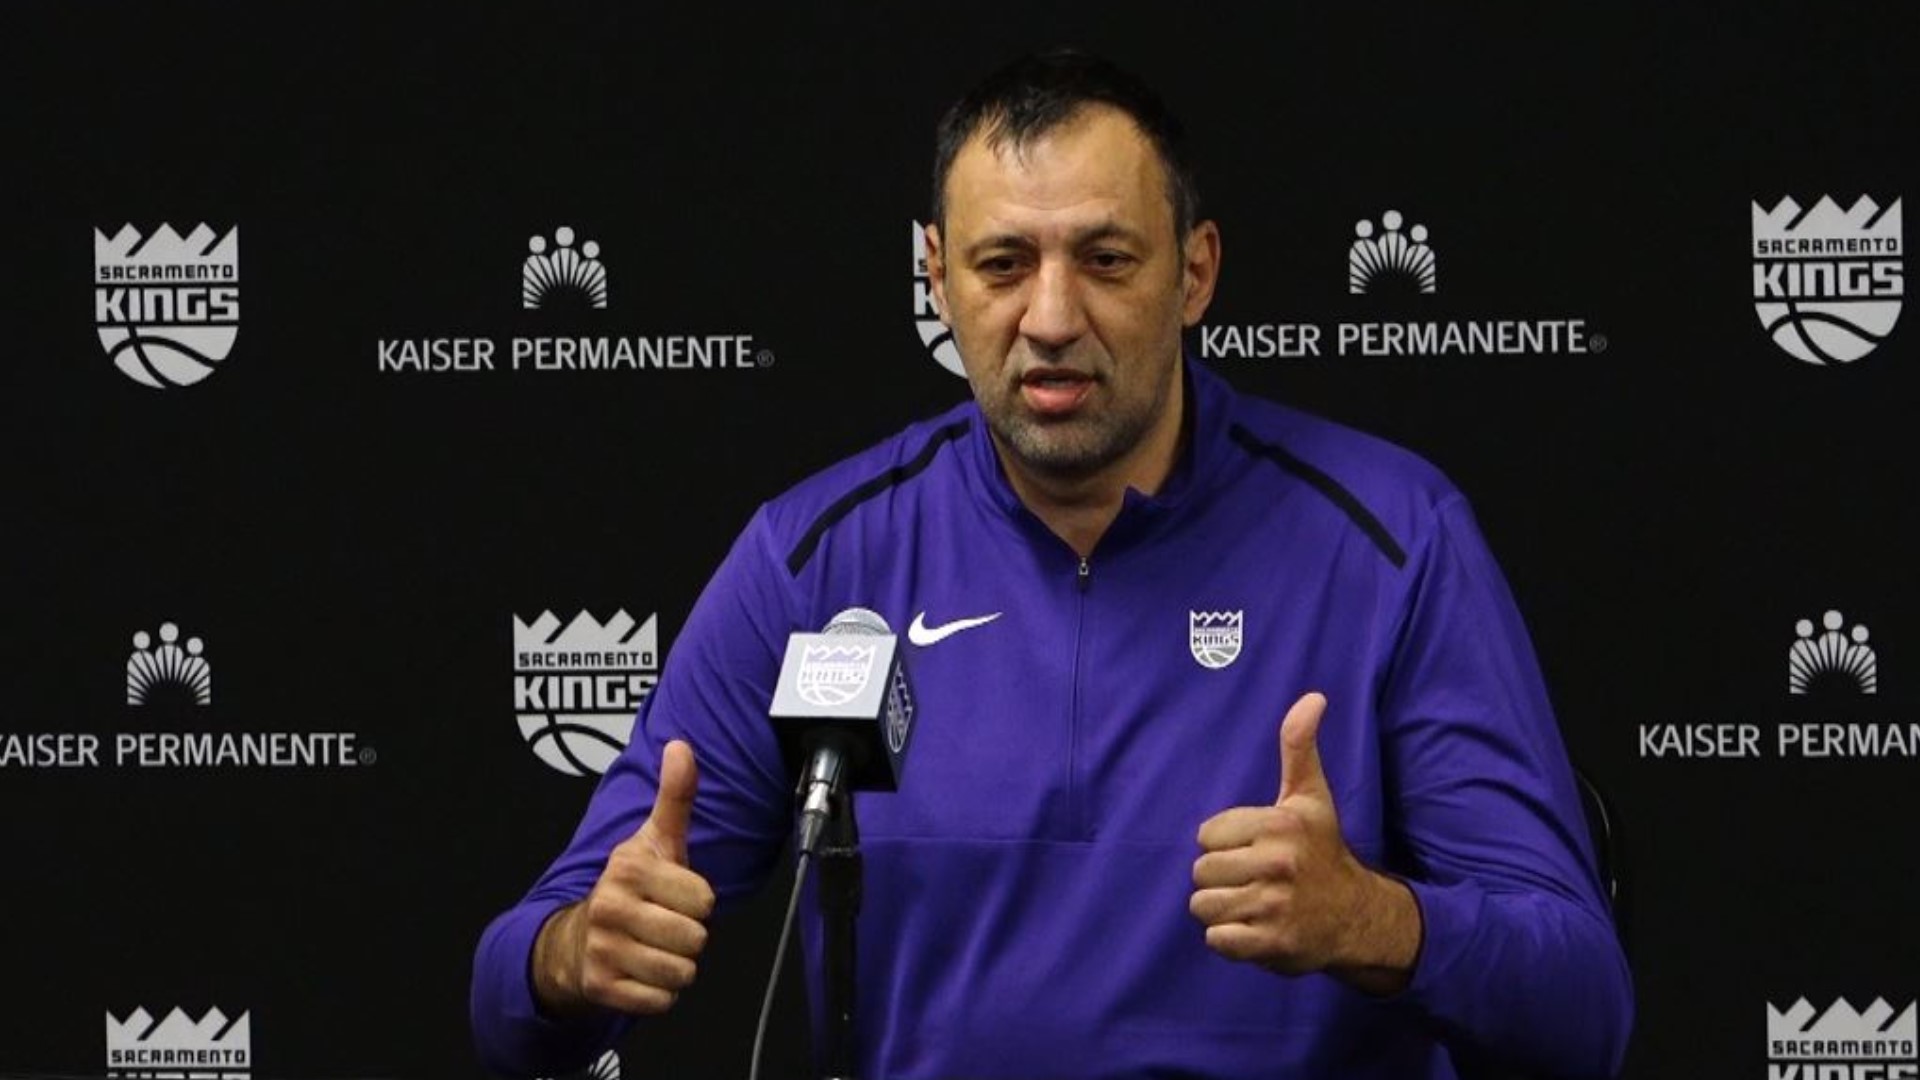 Following the passing of Thursday's NBA trade deadline, Sacramento Kings general manager Vlade Divac talks about acquiring Harrison Barnes, Alec Burks and Caleb Swanigan with the three trades he executed, sending Iman Shumpert, Justin Jackson, Skal Labissiere and Zach Randolph to other teams.